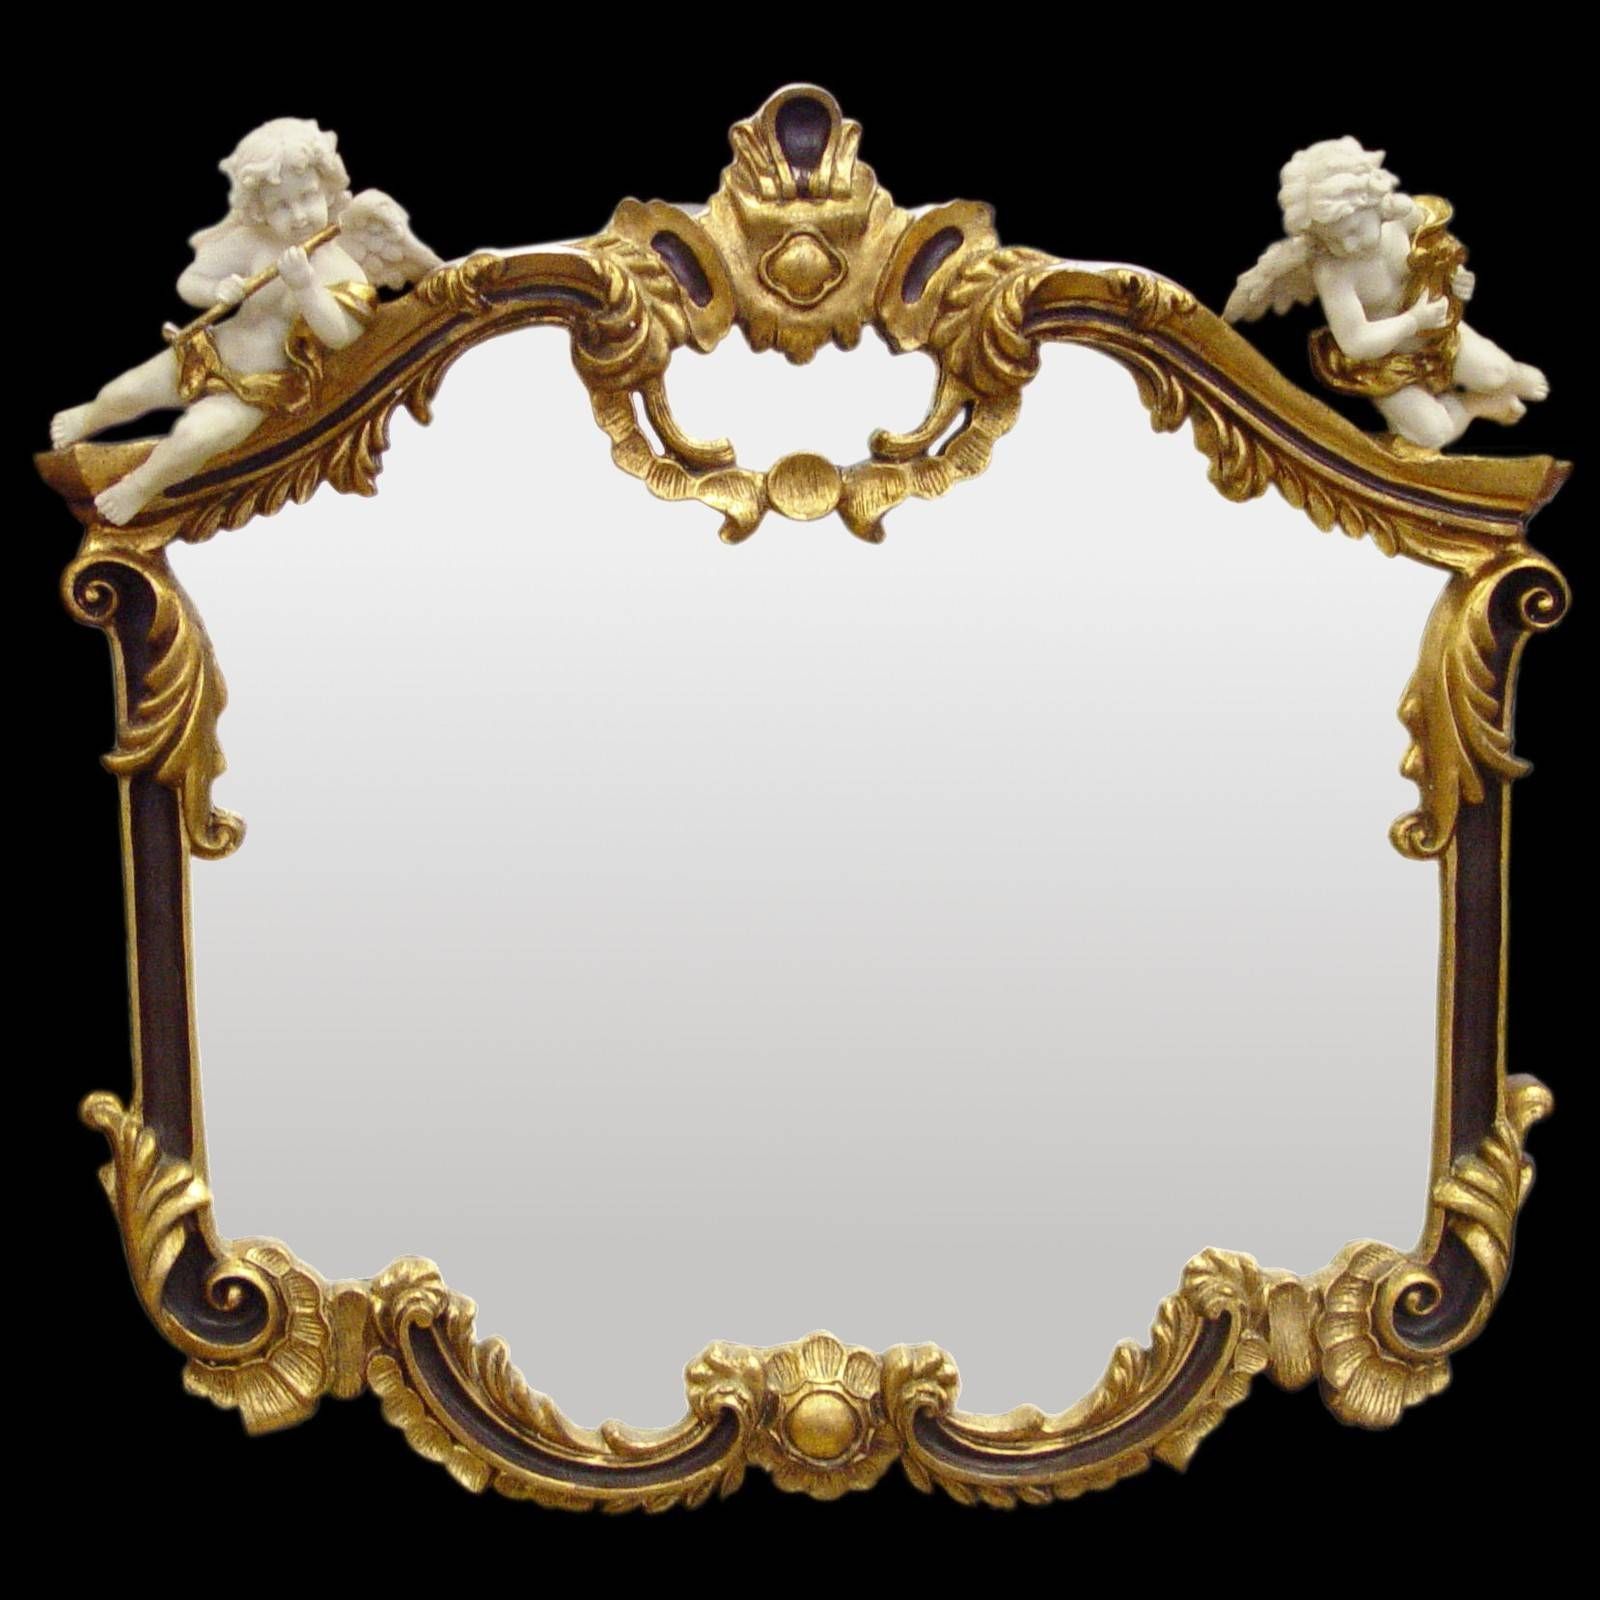 Baroque Mirror Wall Mirror Gold Red 2 White Music Angel Figurines Intended For Gold Baroque Mirrors (View 14 of 15)